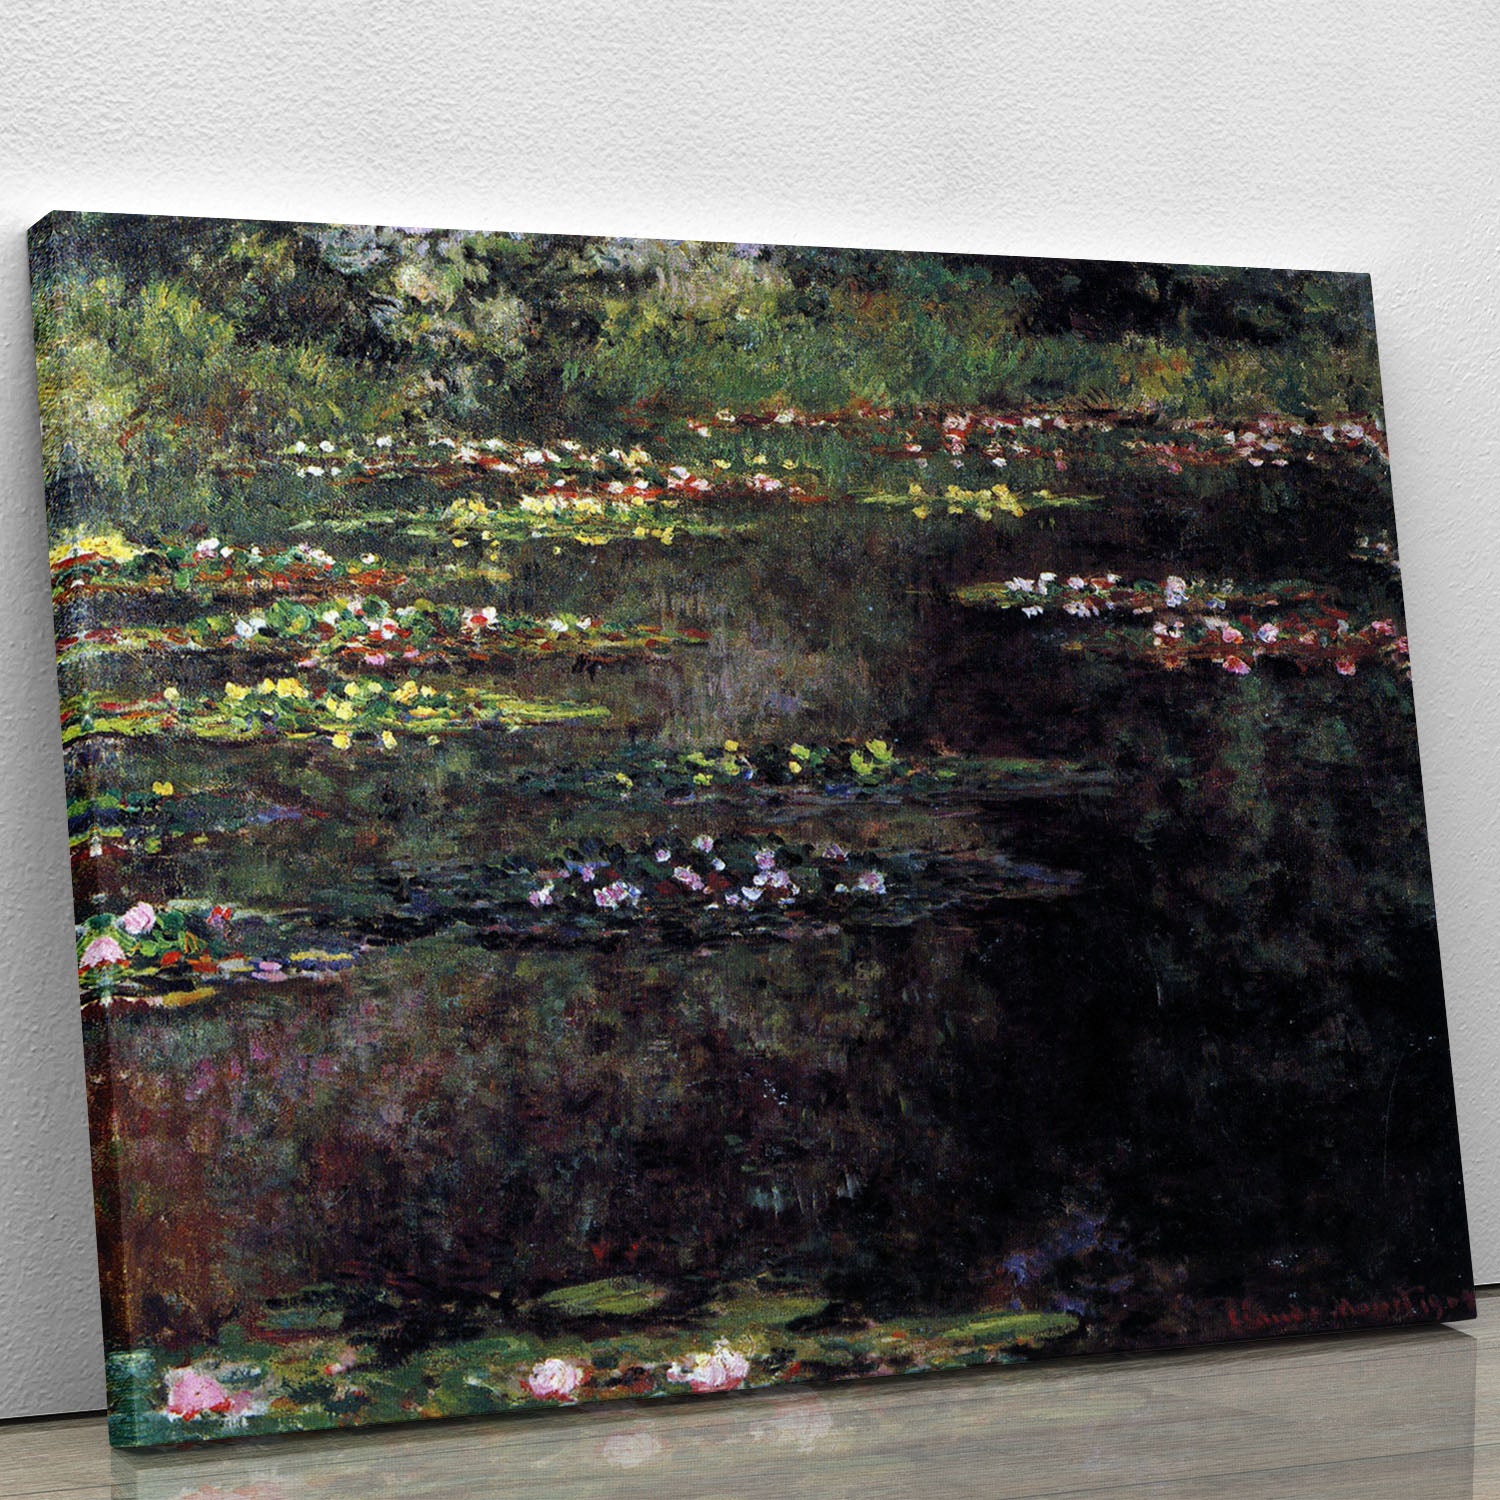 Water lilies water landscape 5 by Monet Canvas Print or Poster - Canvas Art Rocks - 1